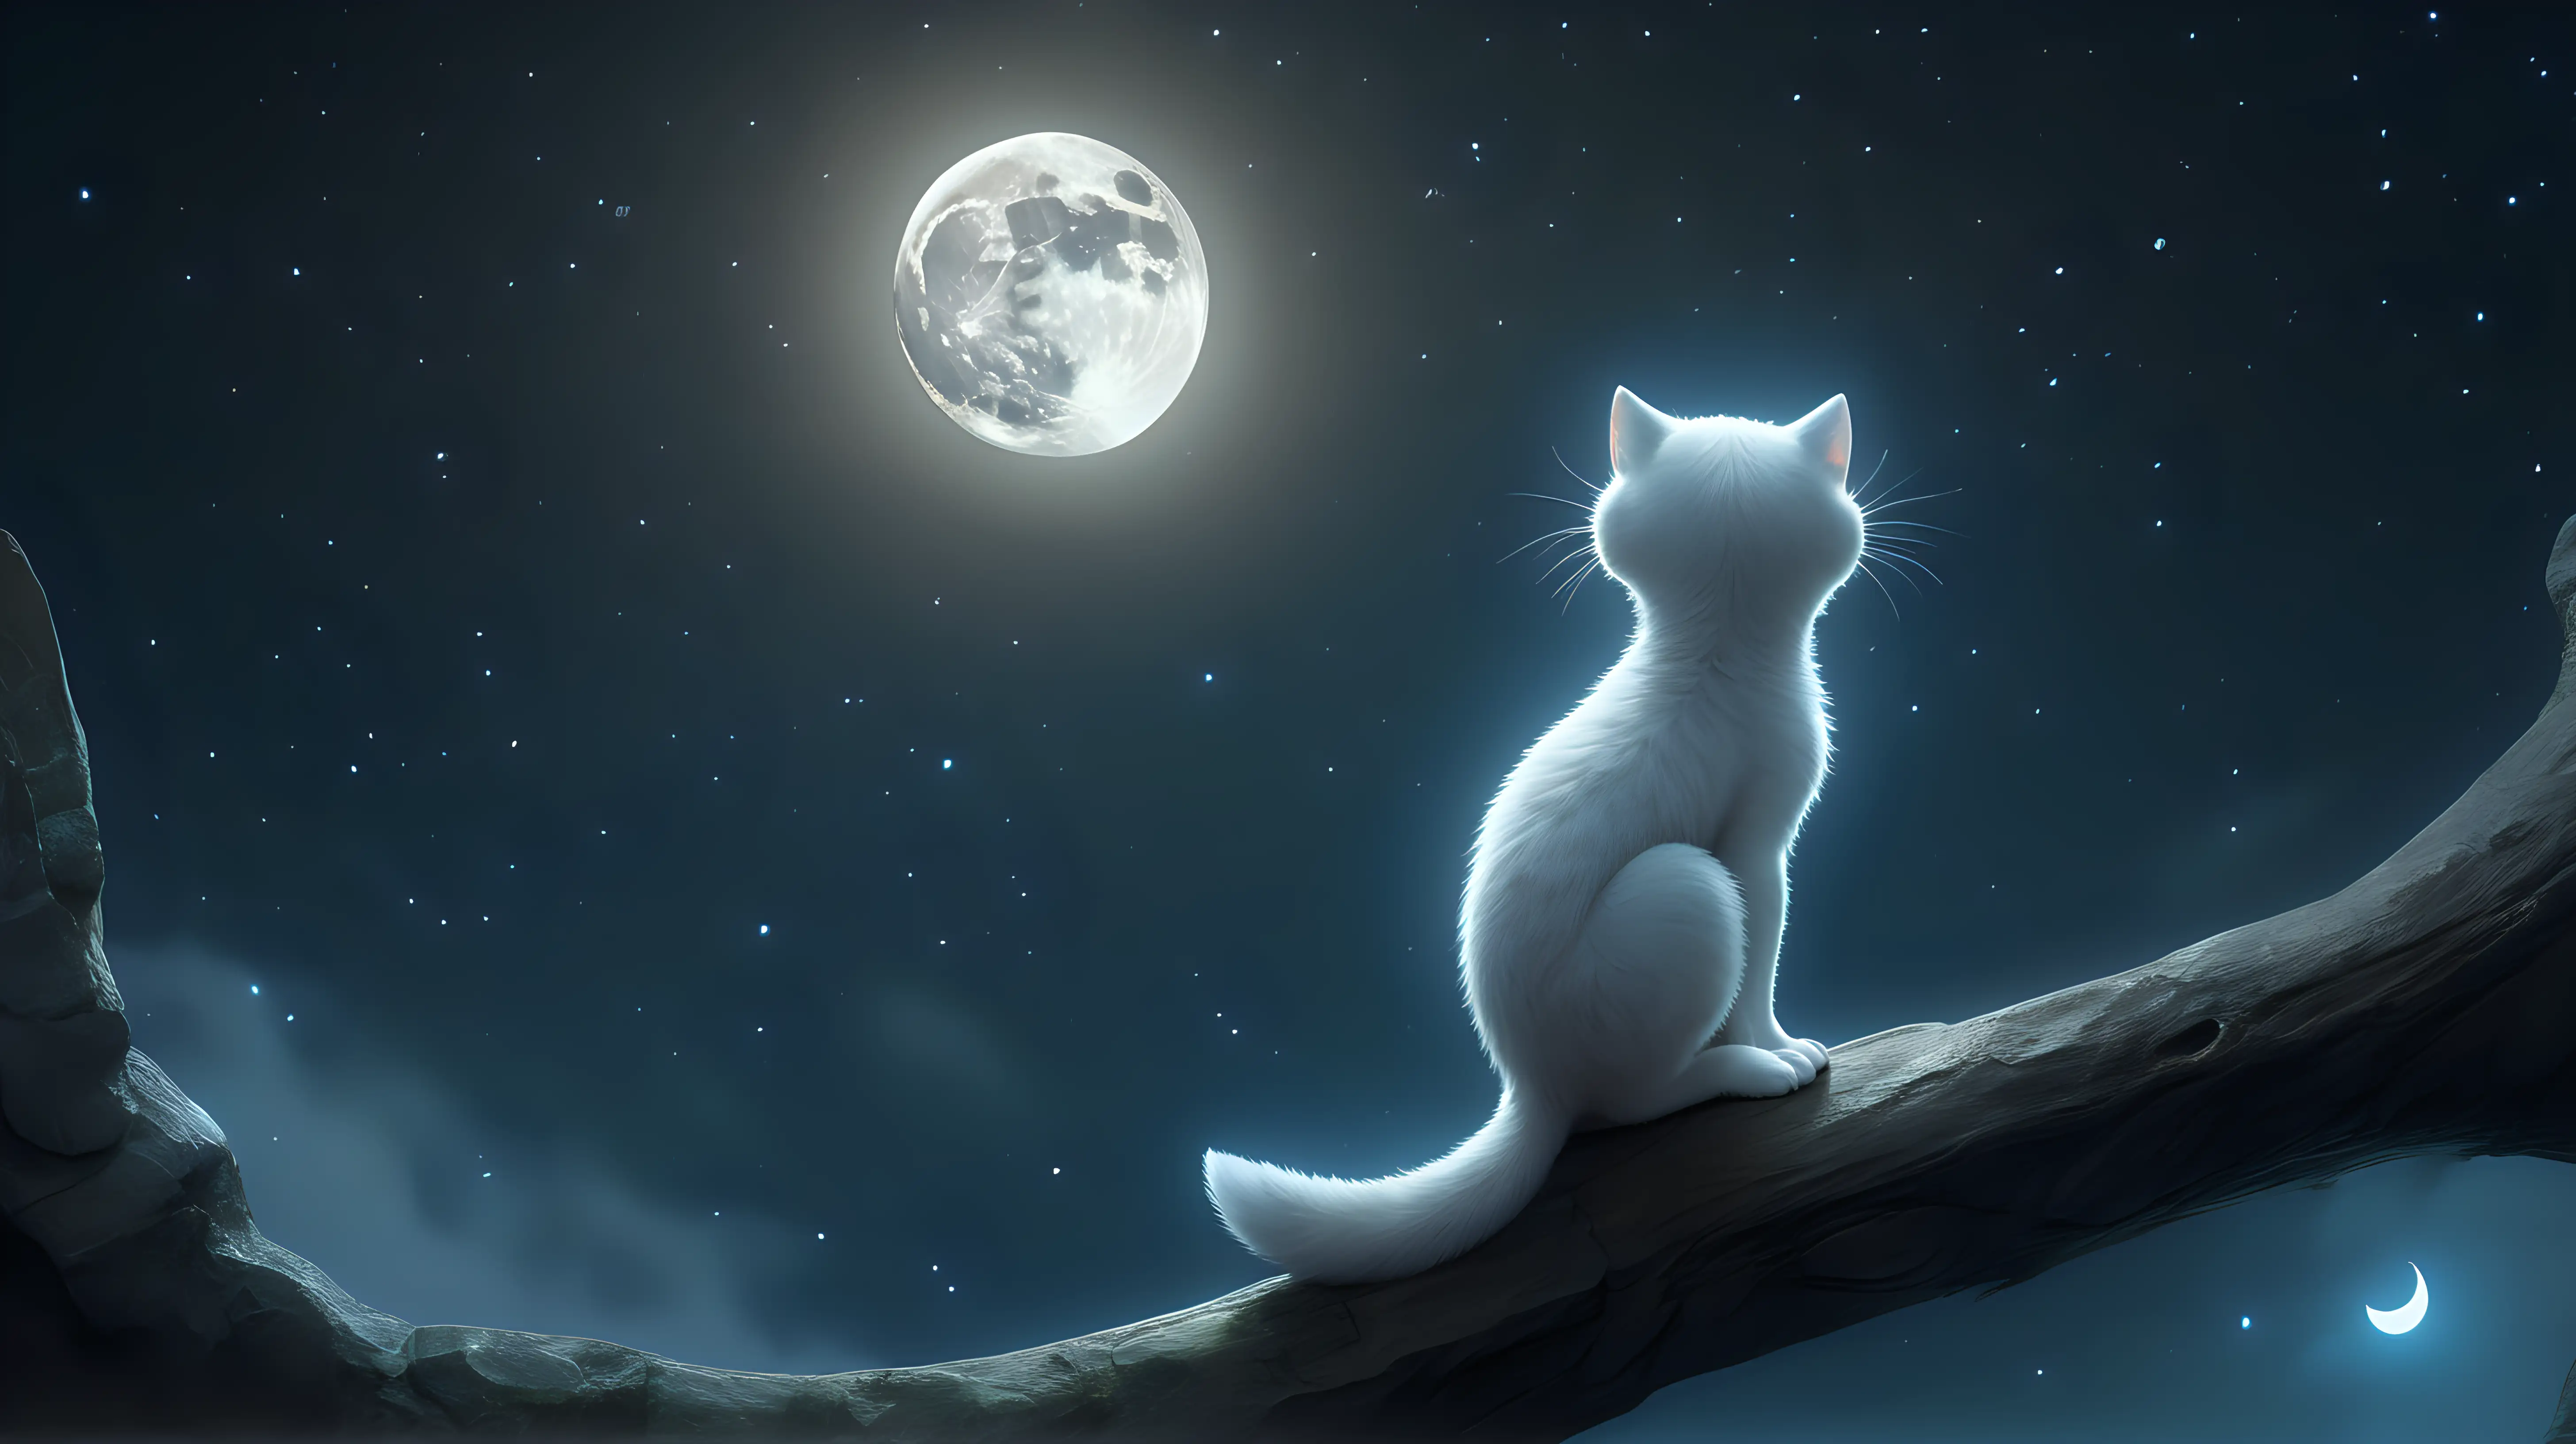 A tiny, mysterious being with luminous eyes, gazing up at a shimmering full moon in awe.